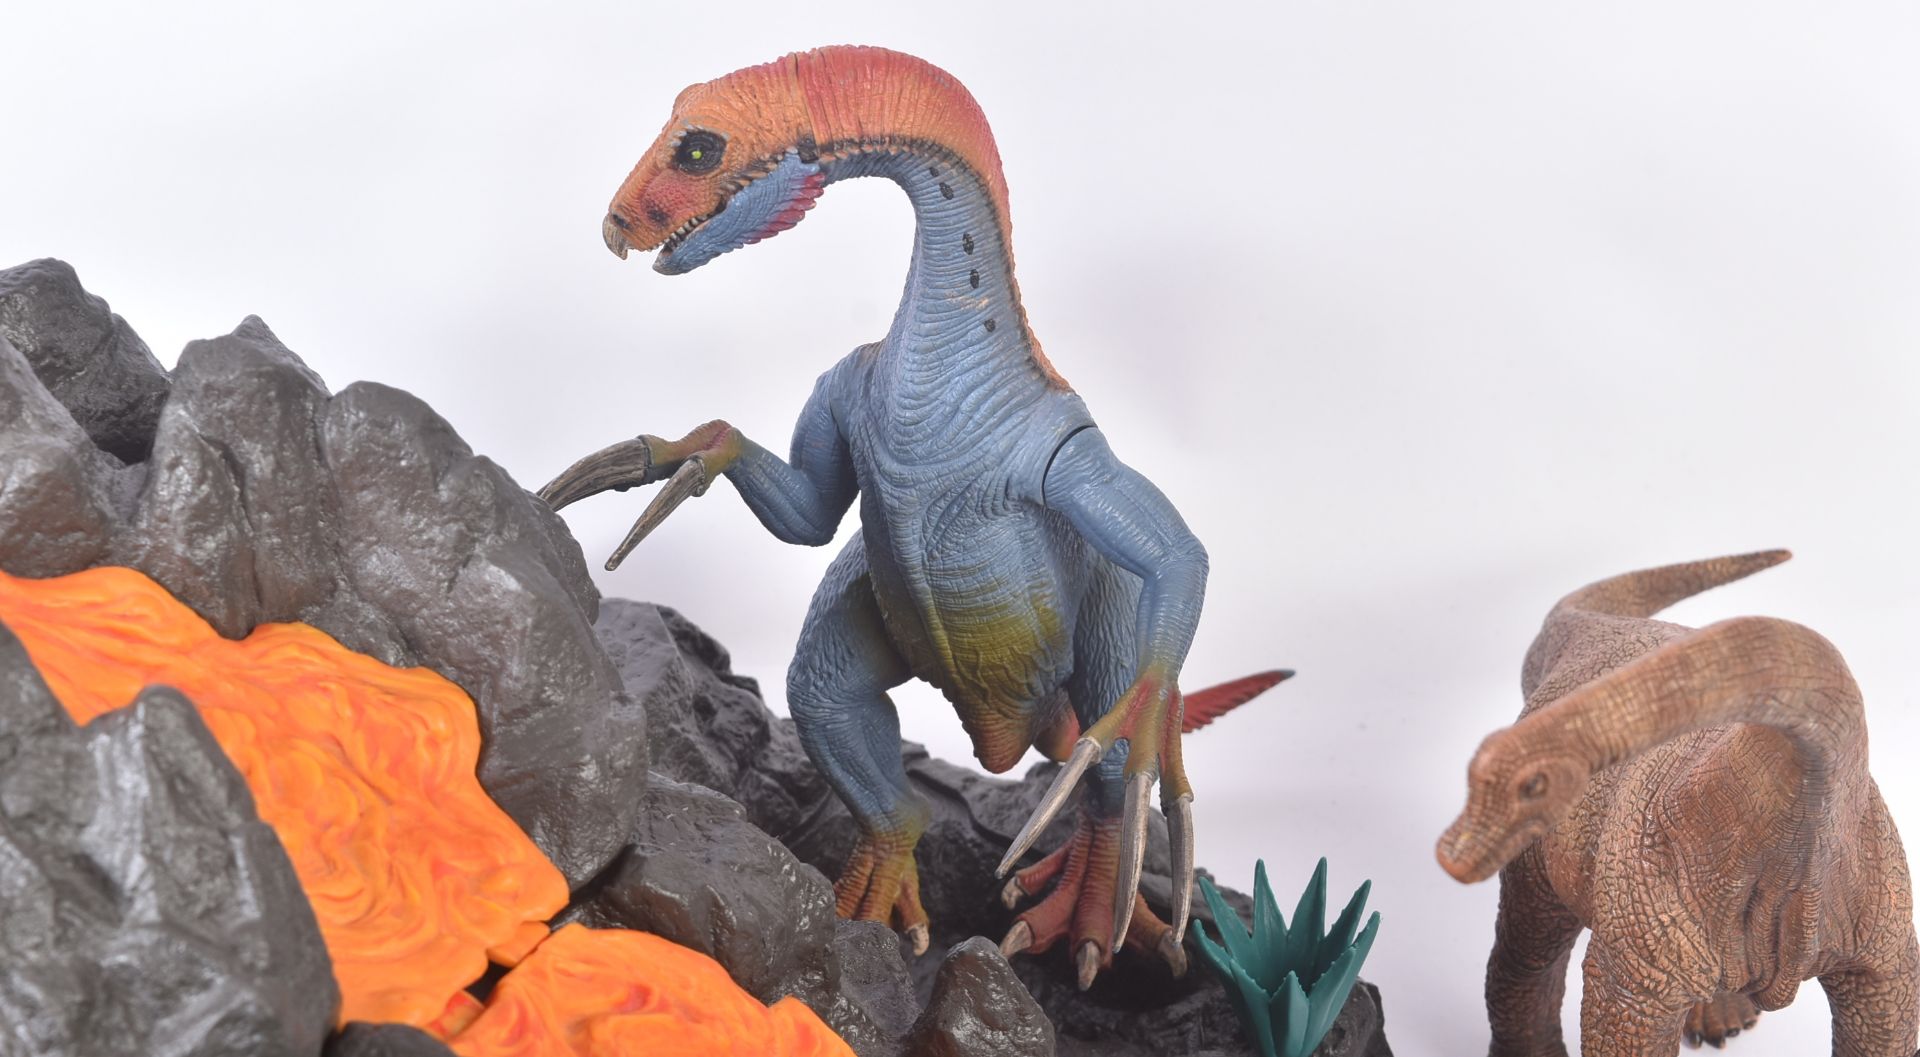 SCHLEICH VOLCANO PLAYSET WITH DINOSAURS - Image 3 of 10